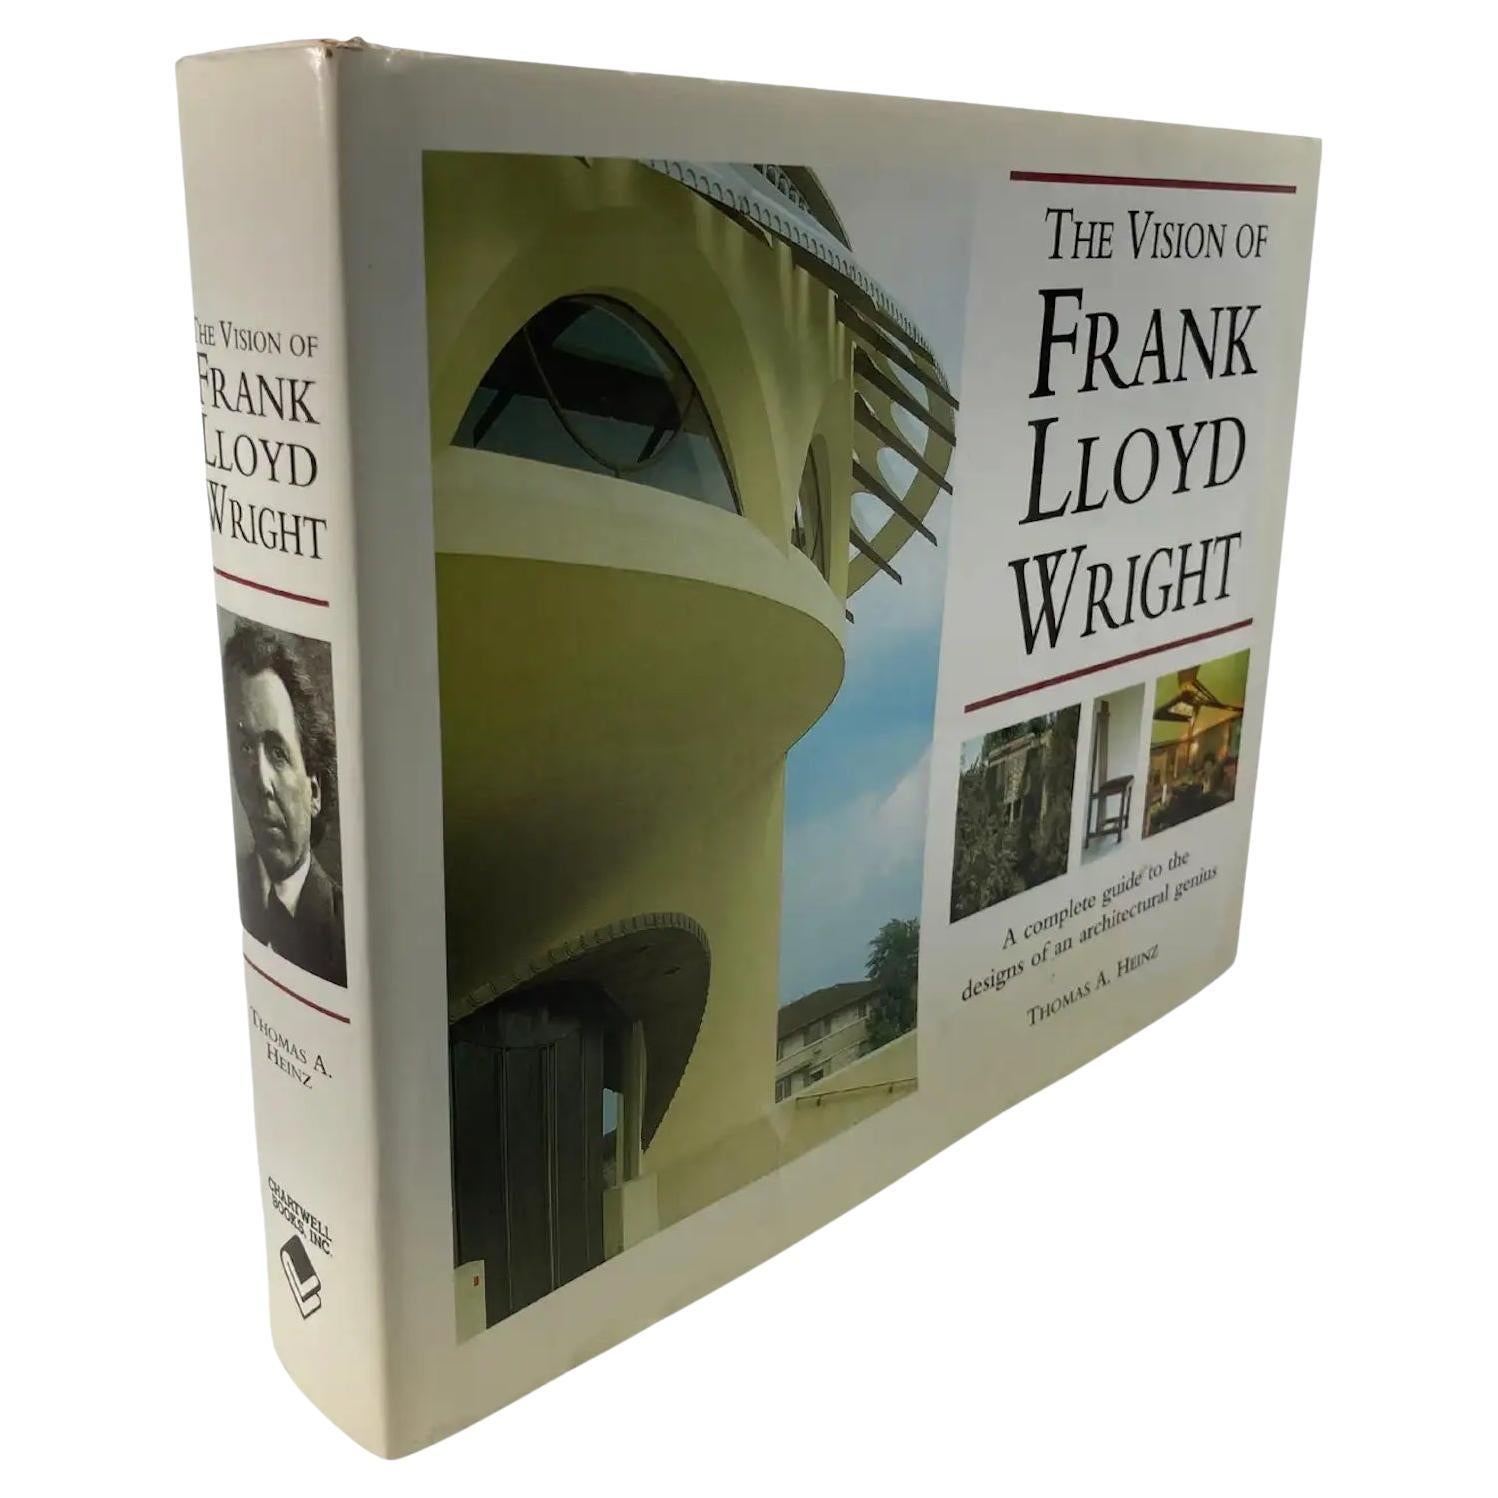 For　Edition　Lloyd　by　Frank　Vision　Sale　at　of　Hardcover　Book　Wright　1st　Thomas　a.　Heinz　1stDibs